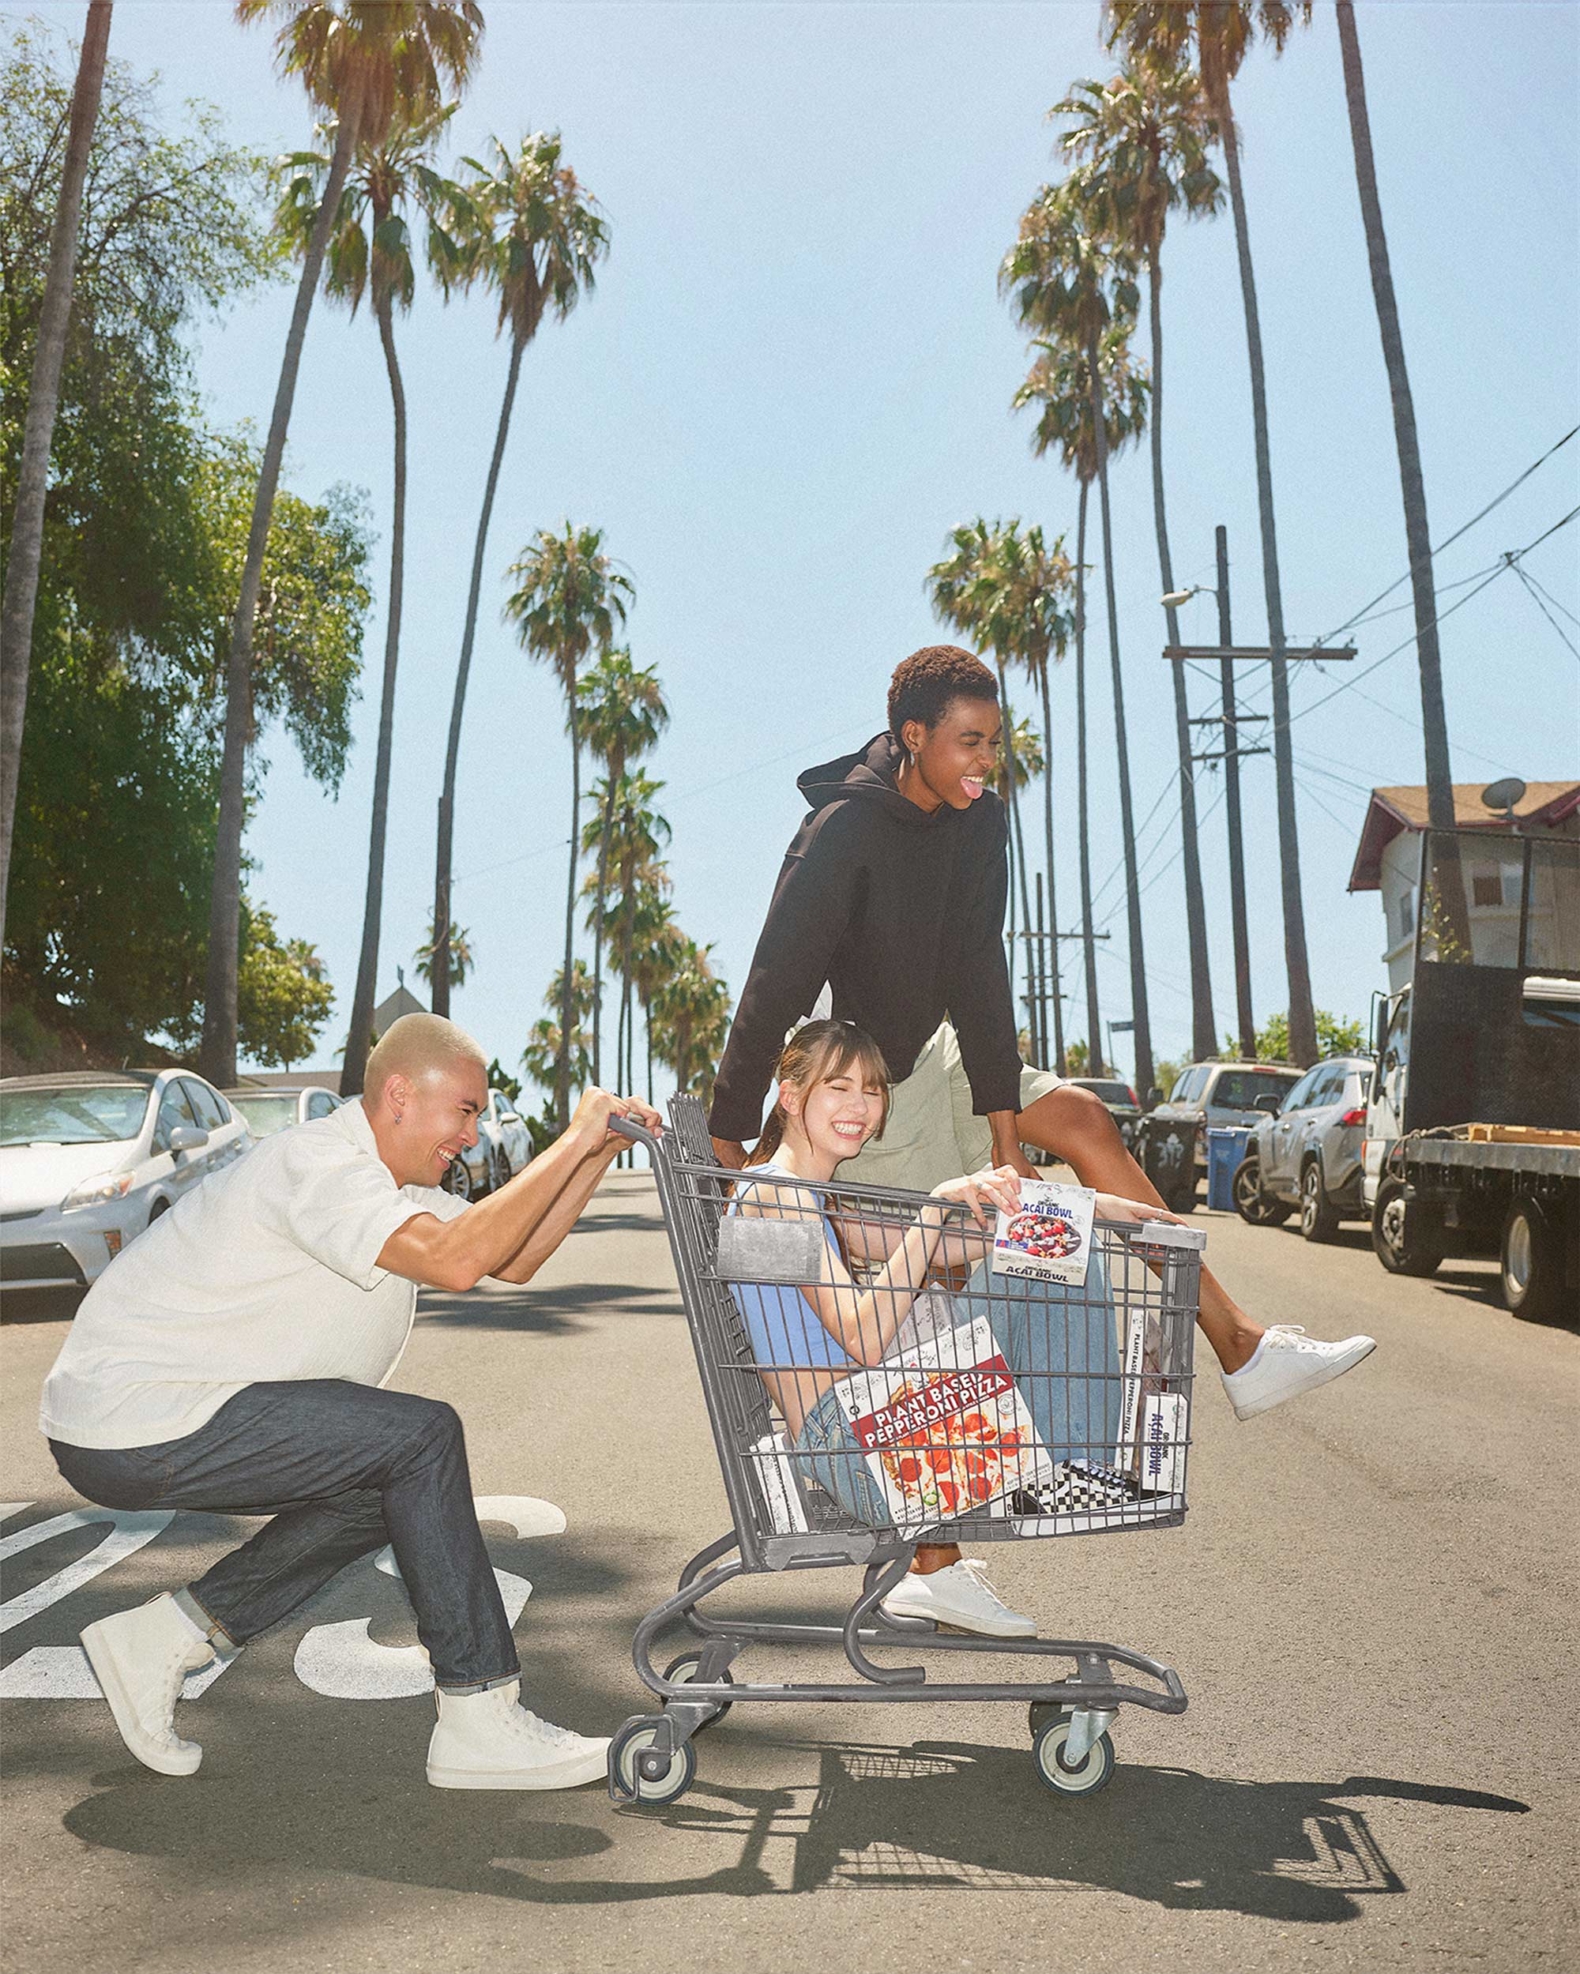 Shot of an LA palm tree-lined street with one girl sitting inside a grocery shopping cart that is also carrying Tattooed Chef frozen meals, another girl is sitting next to her on the top edge of the cart, laughing. A man pushes the cart across the street while laughing.